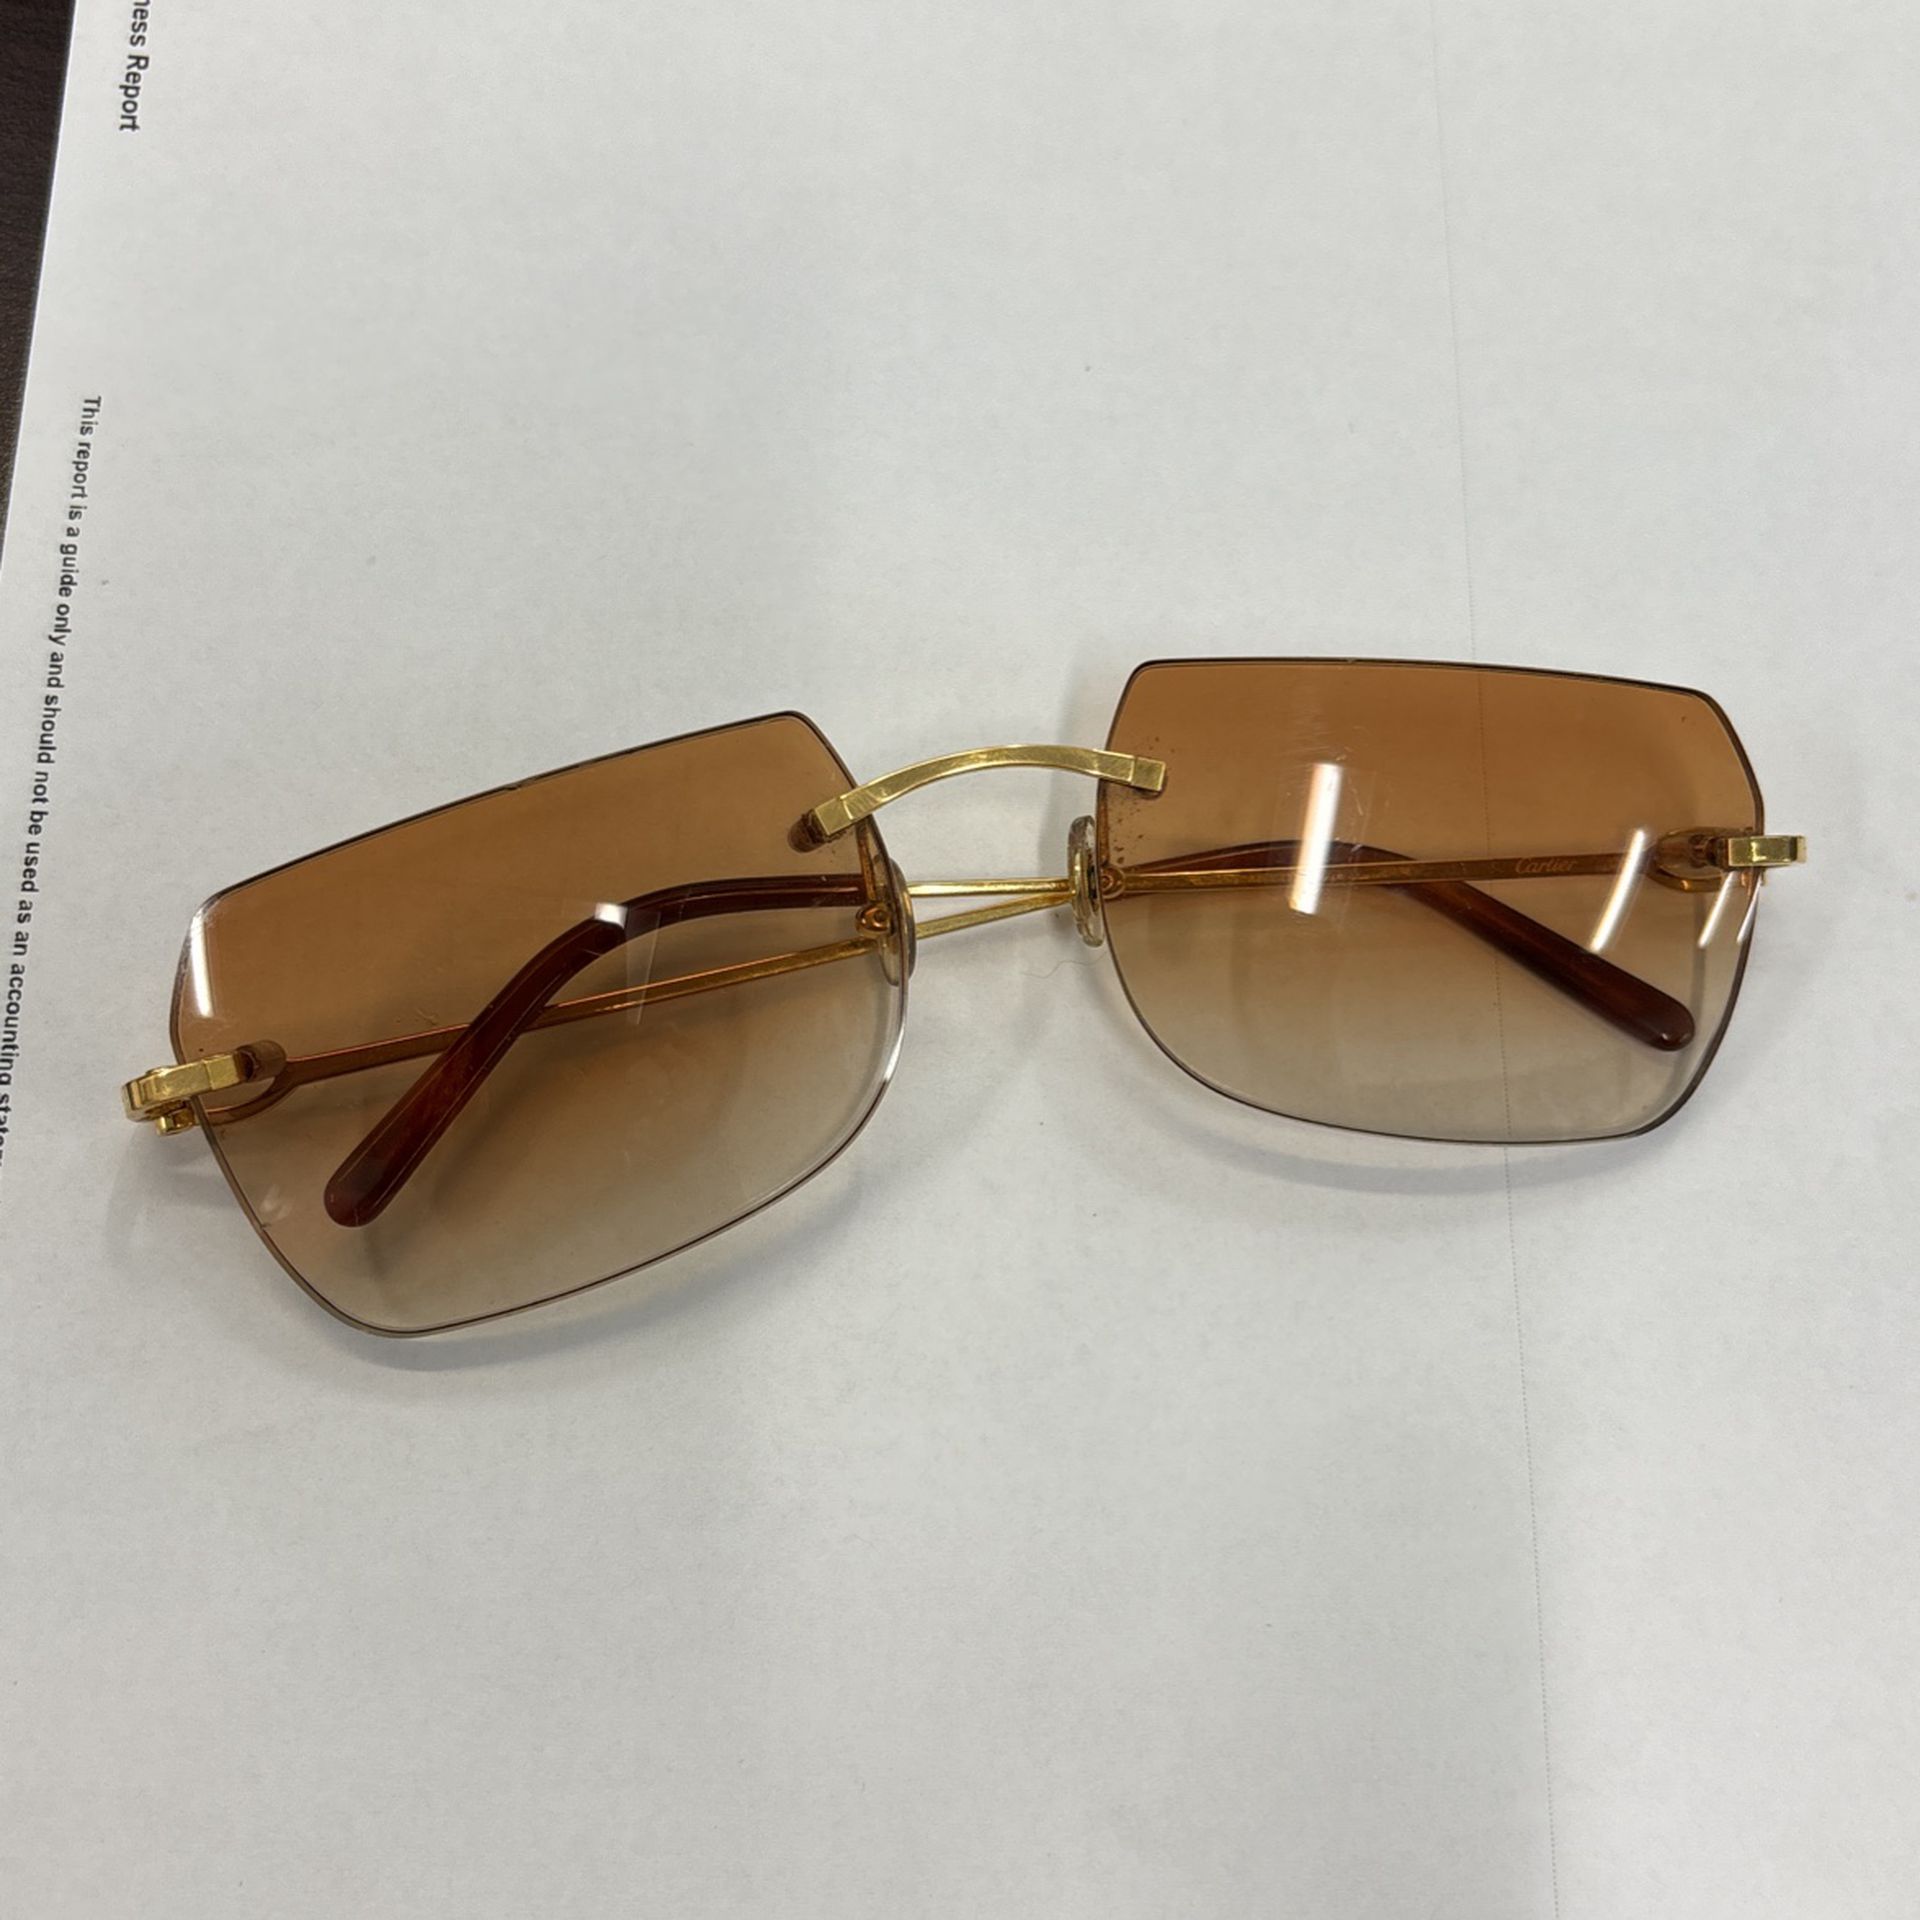 Cartier Wire Sunglasses Ct 00500 001 Yellow Toned Hardware